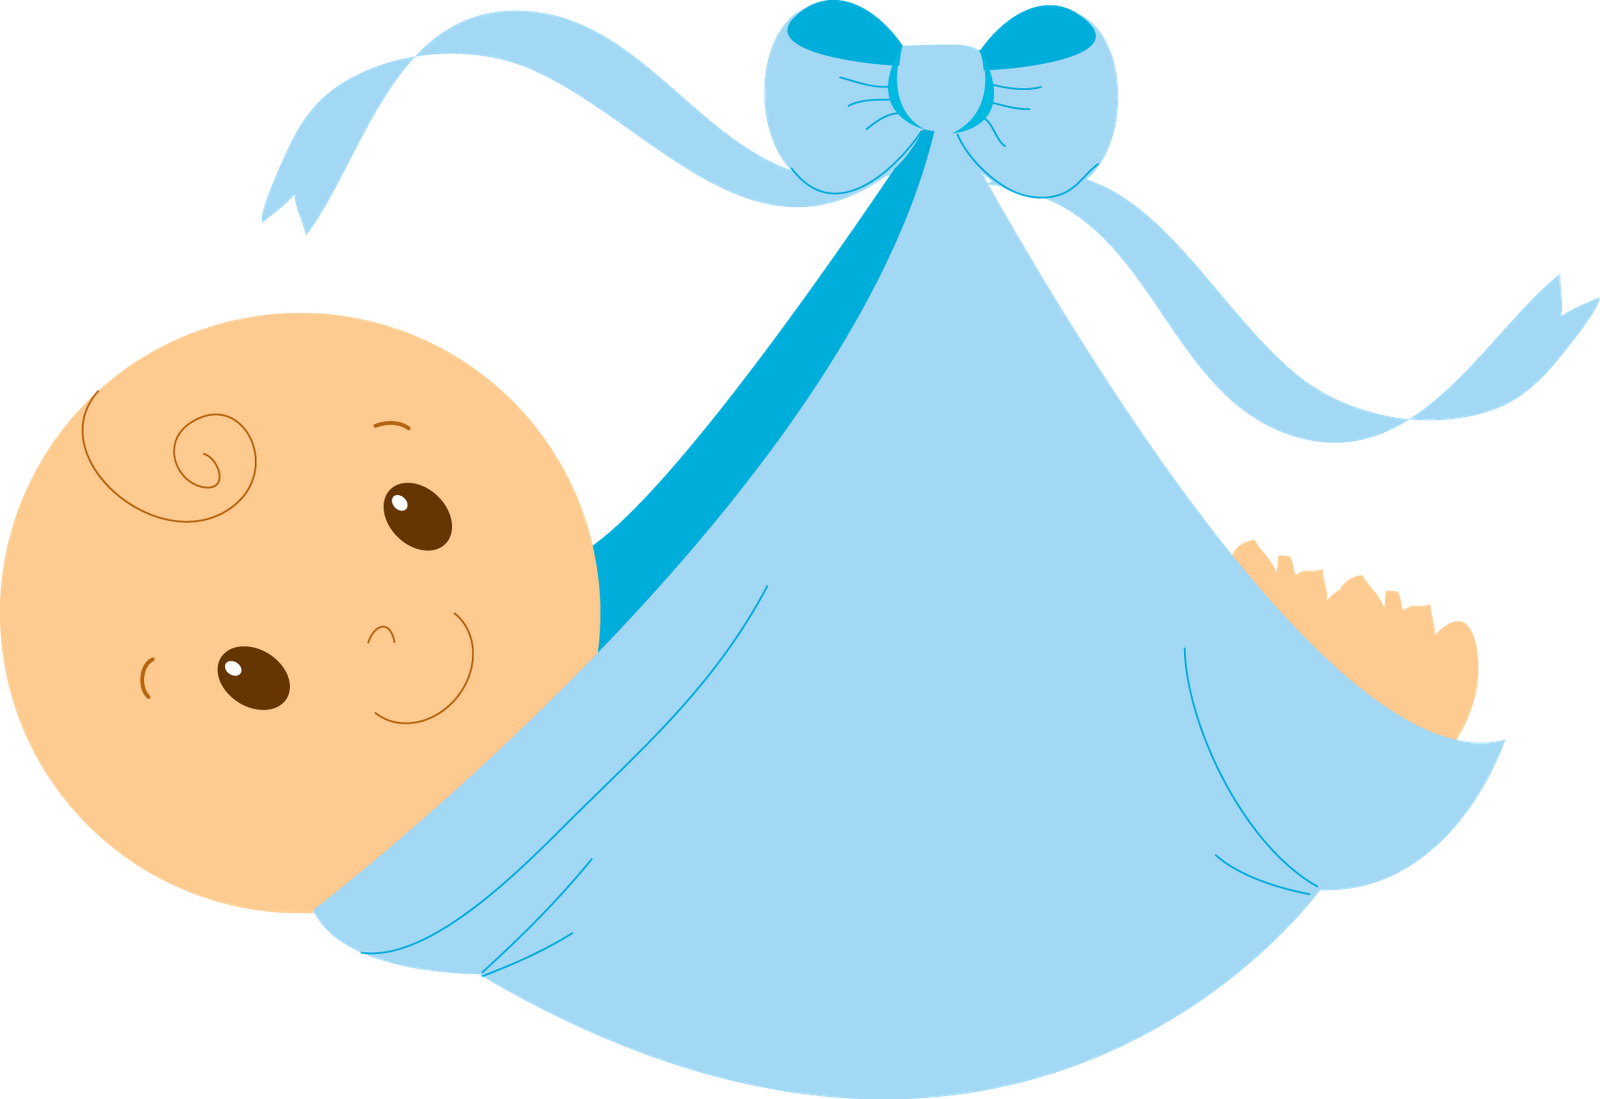 Clipart baby graphic. Shower clip art http